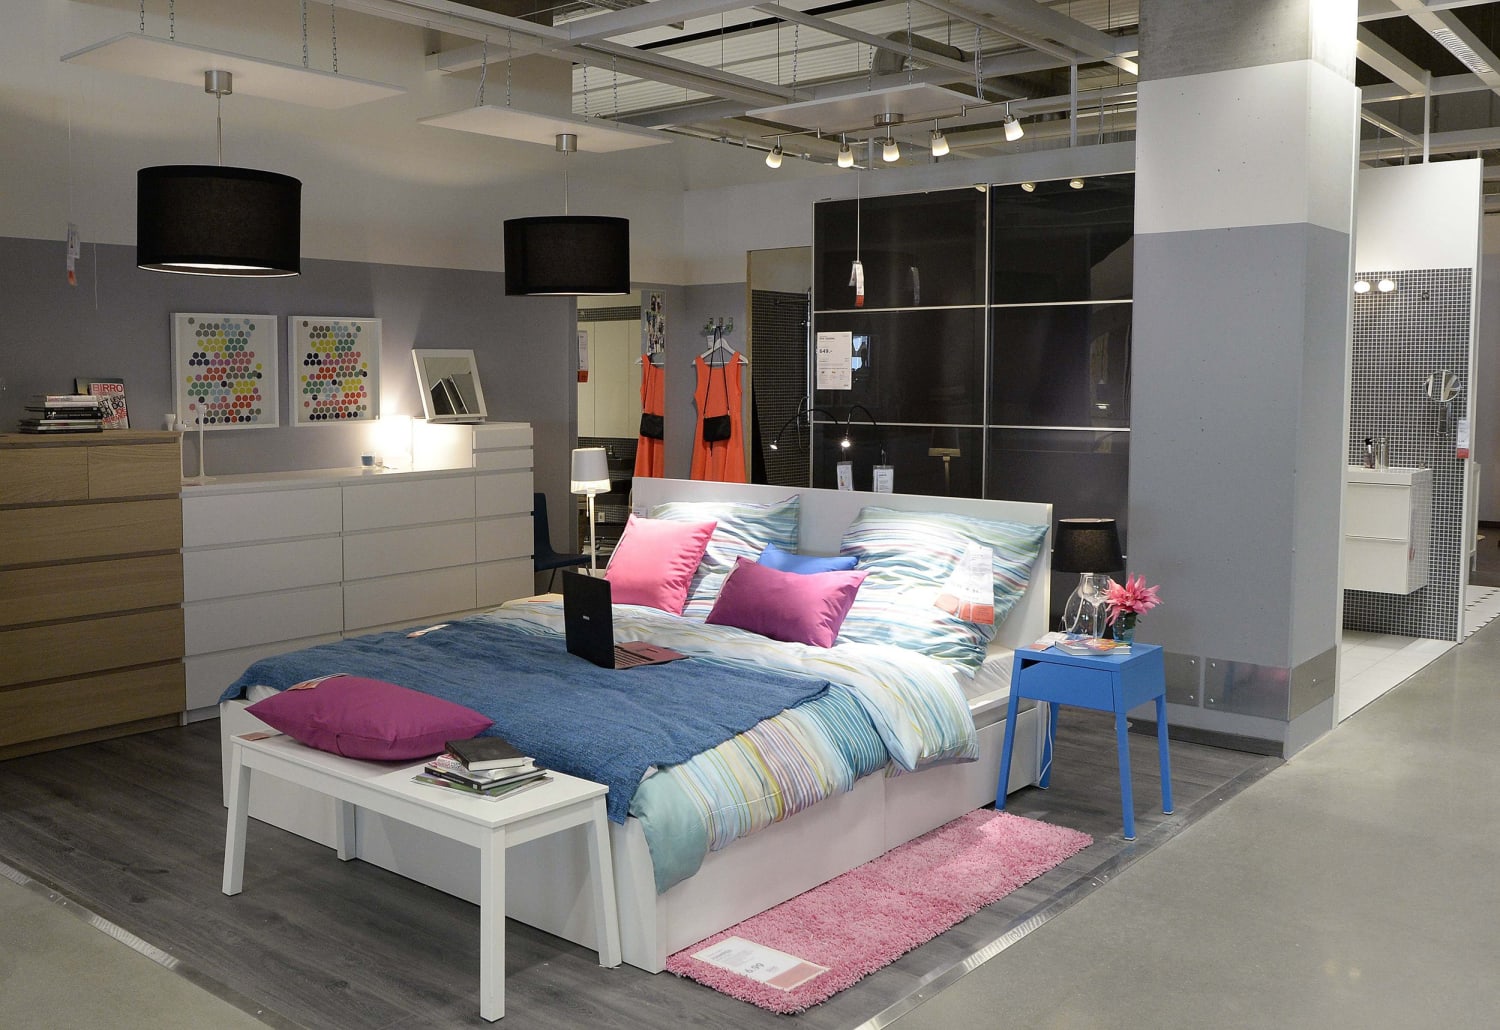 vals Rijpen diep You can actually stay overnight in an Ikea — here's how